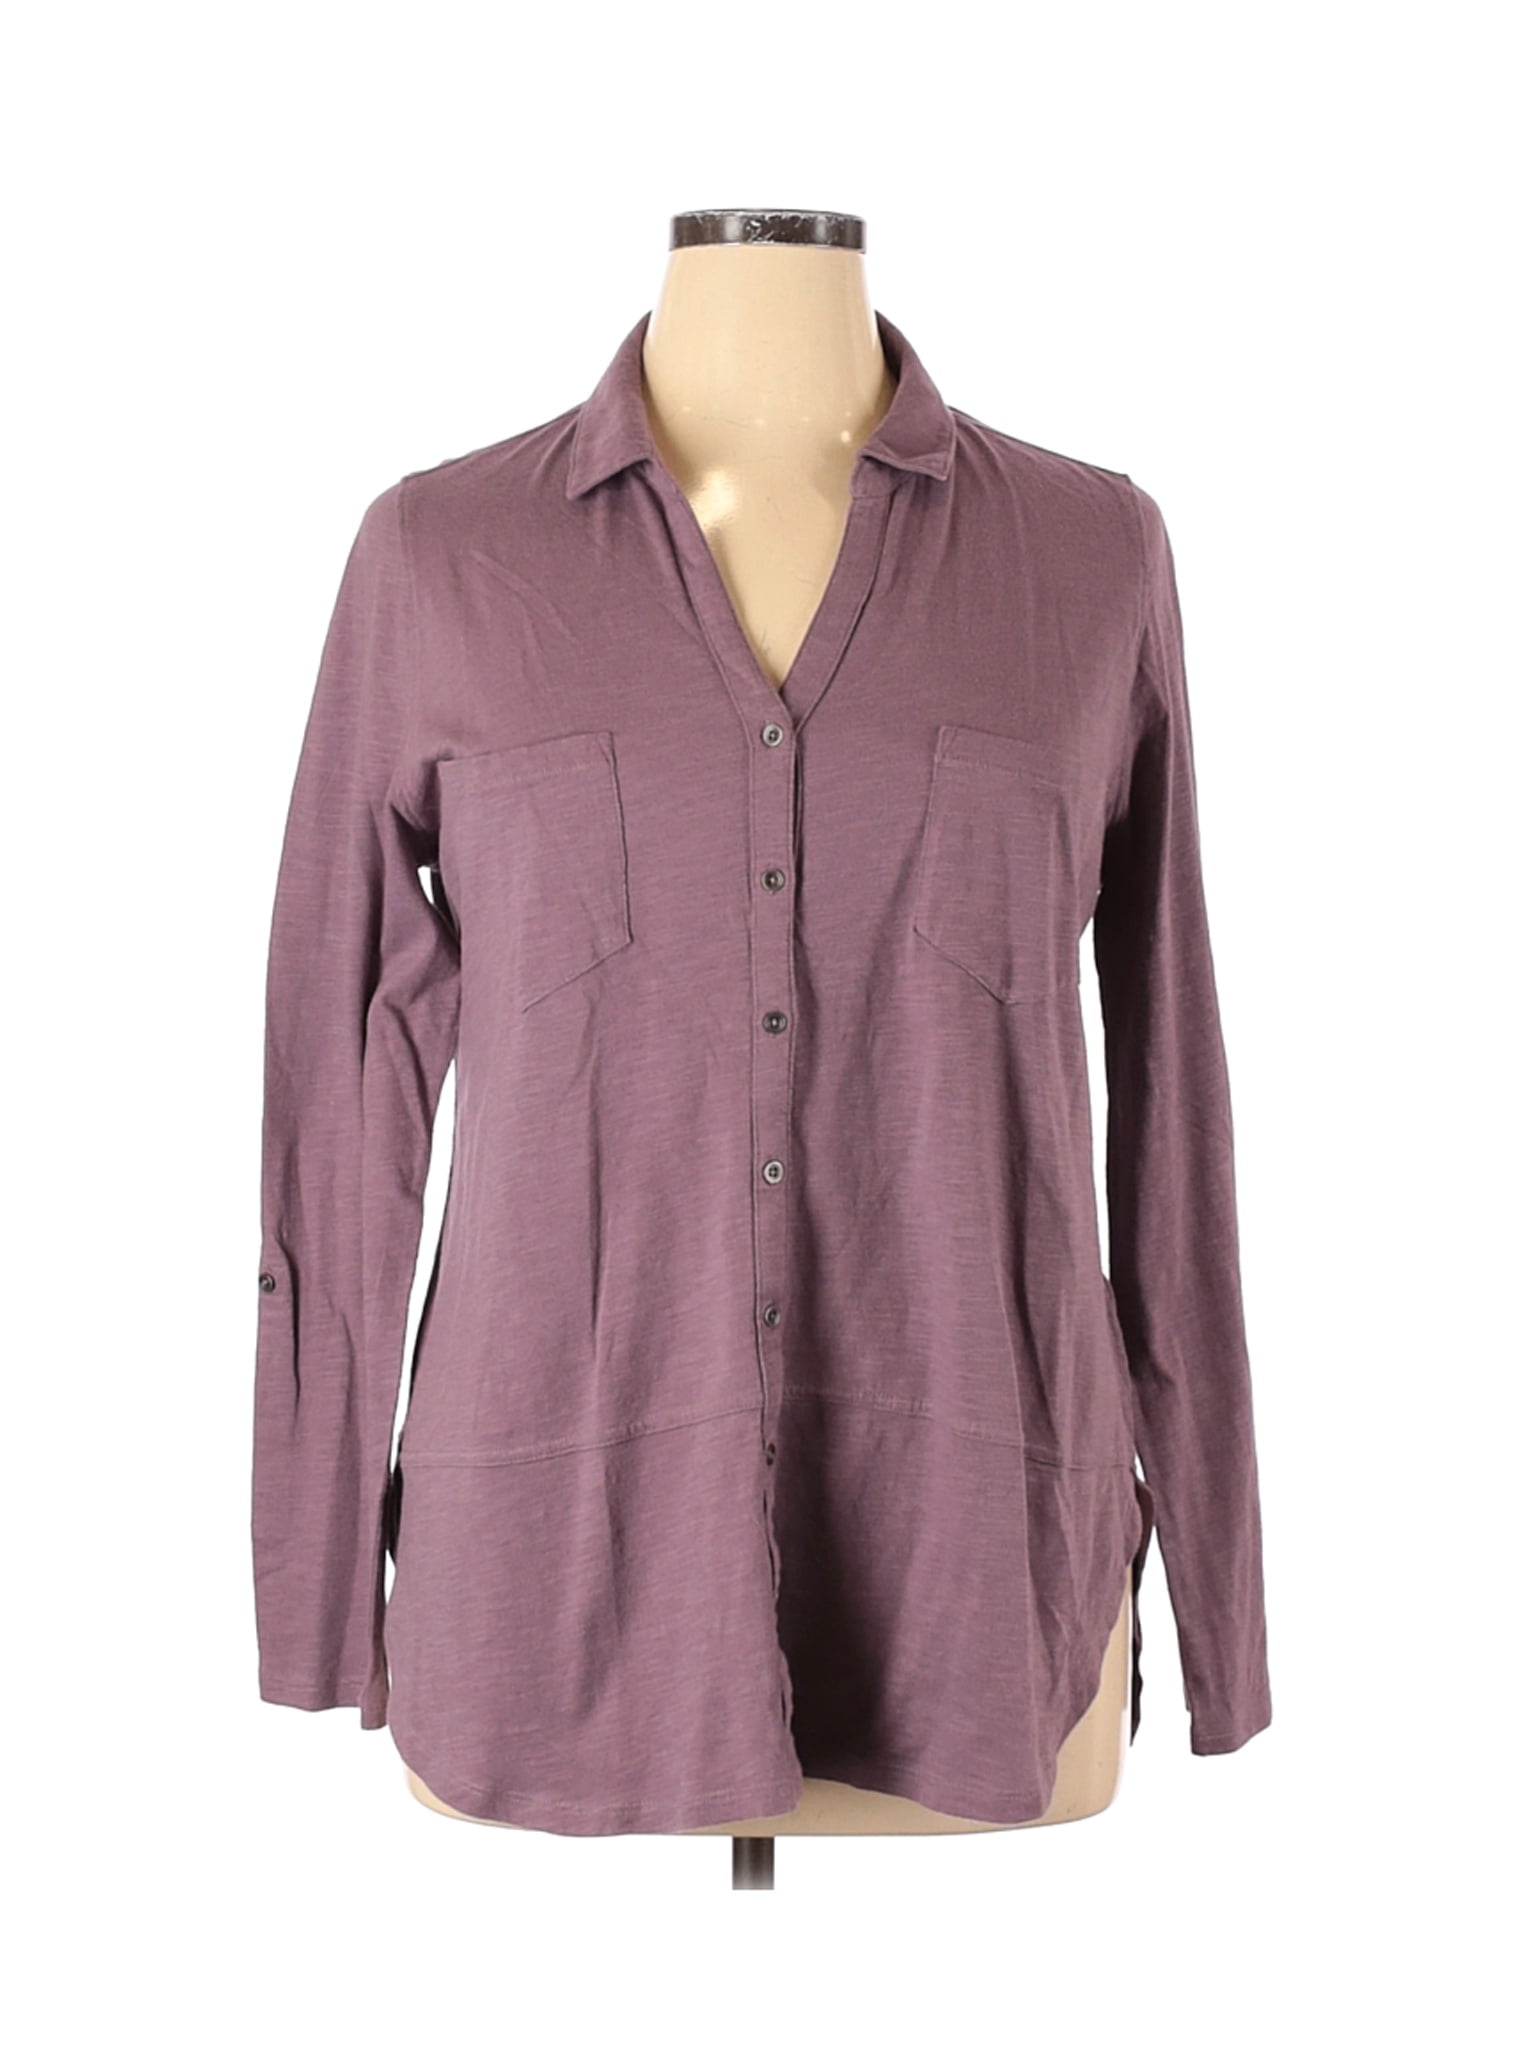 SONOMA Goods for Life - Pre-Owned Sonoma Goods for Life Women's Size ...